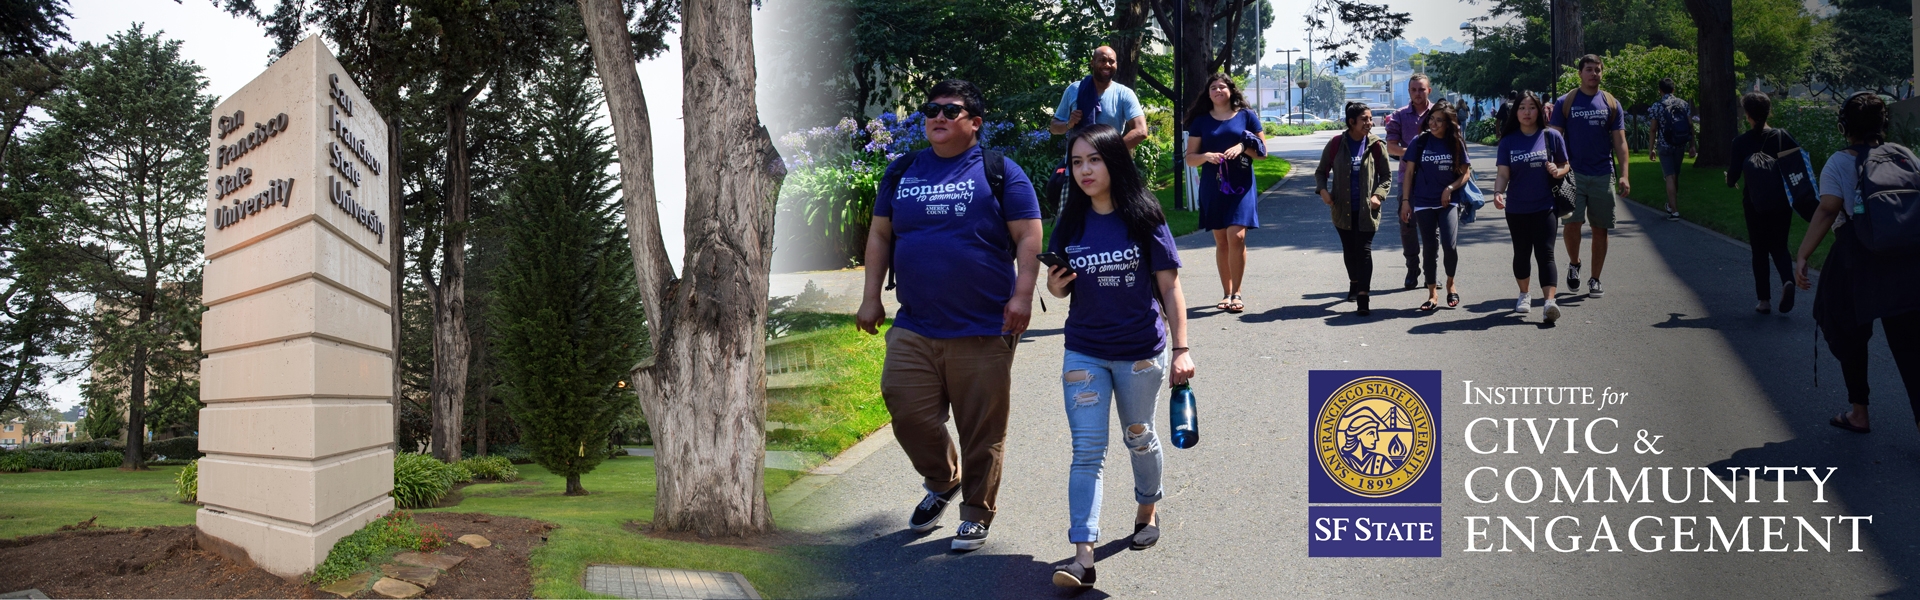 iconnect students walking on SF State campus by SF State entry way